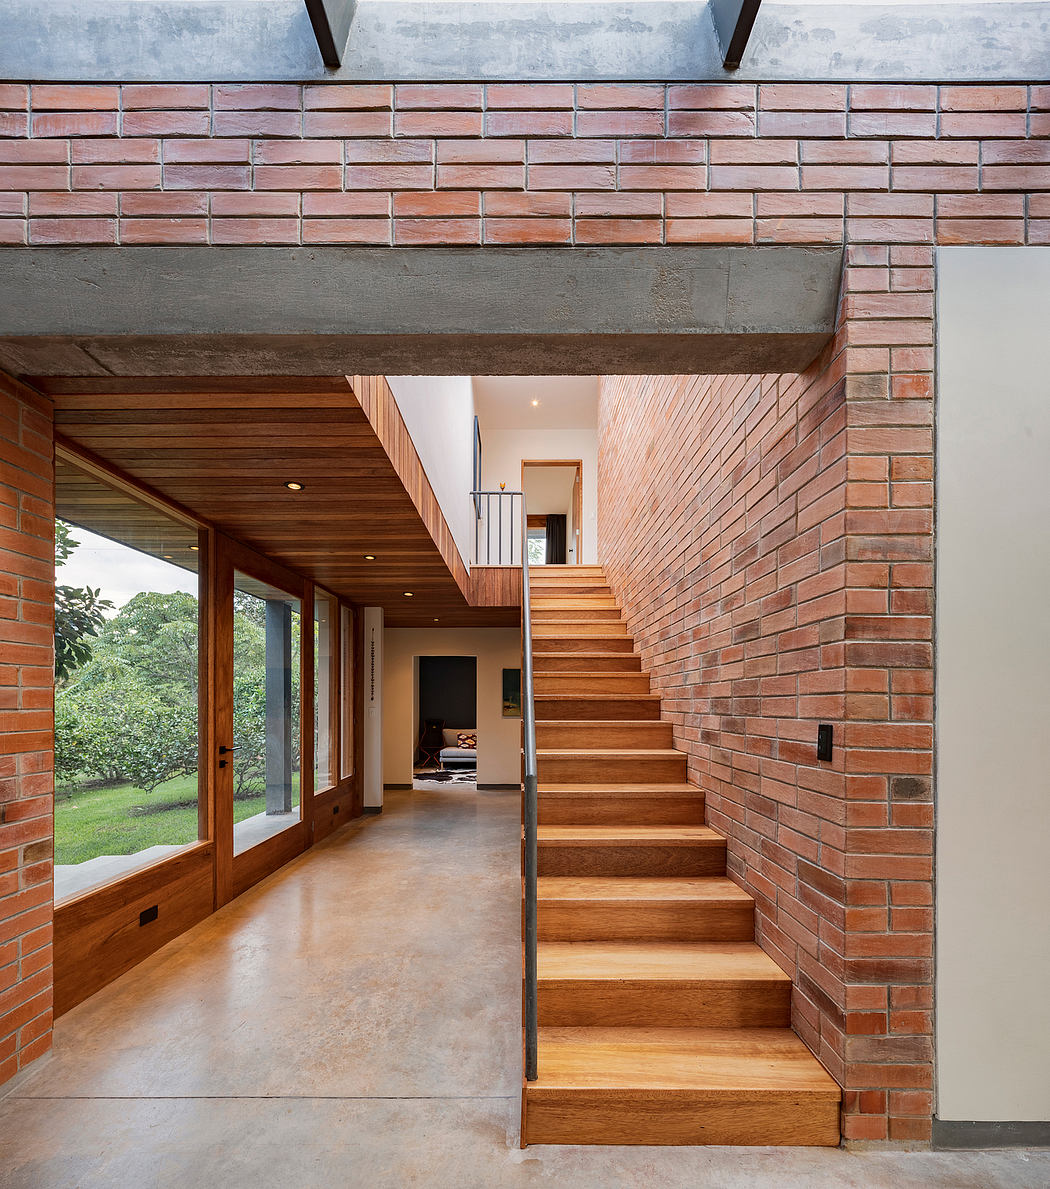 Brick walls, wood stairs, large windows, and an open, modern interior design.